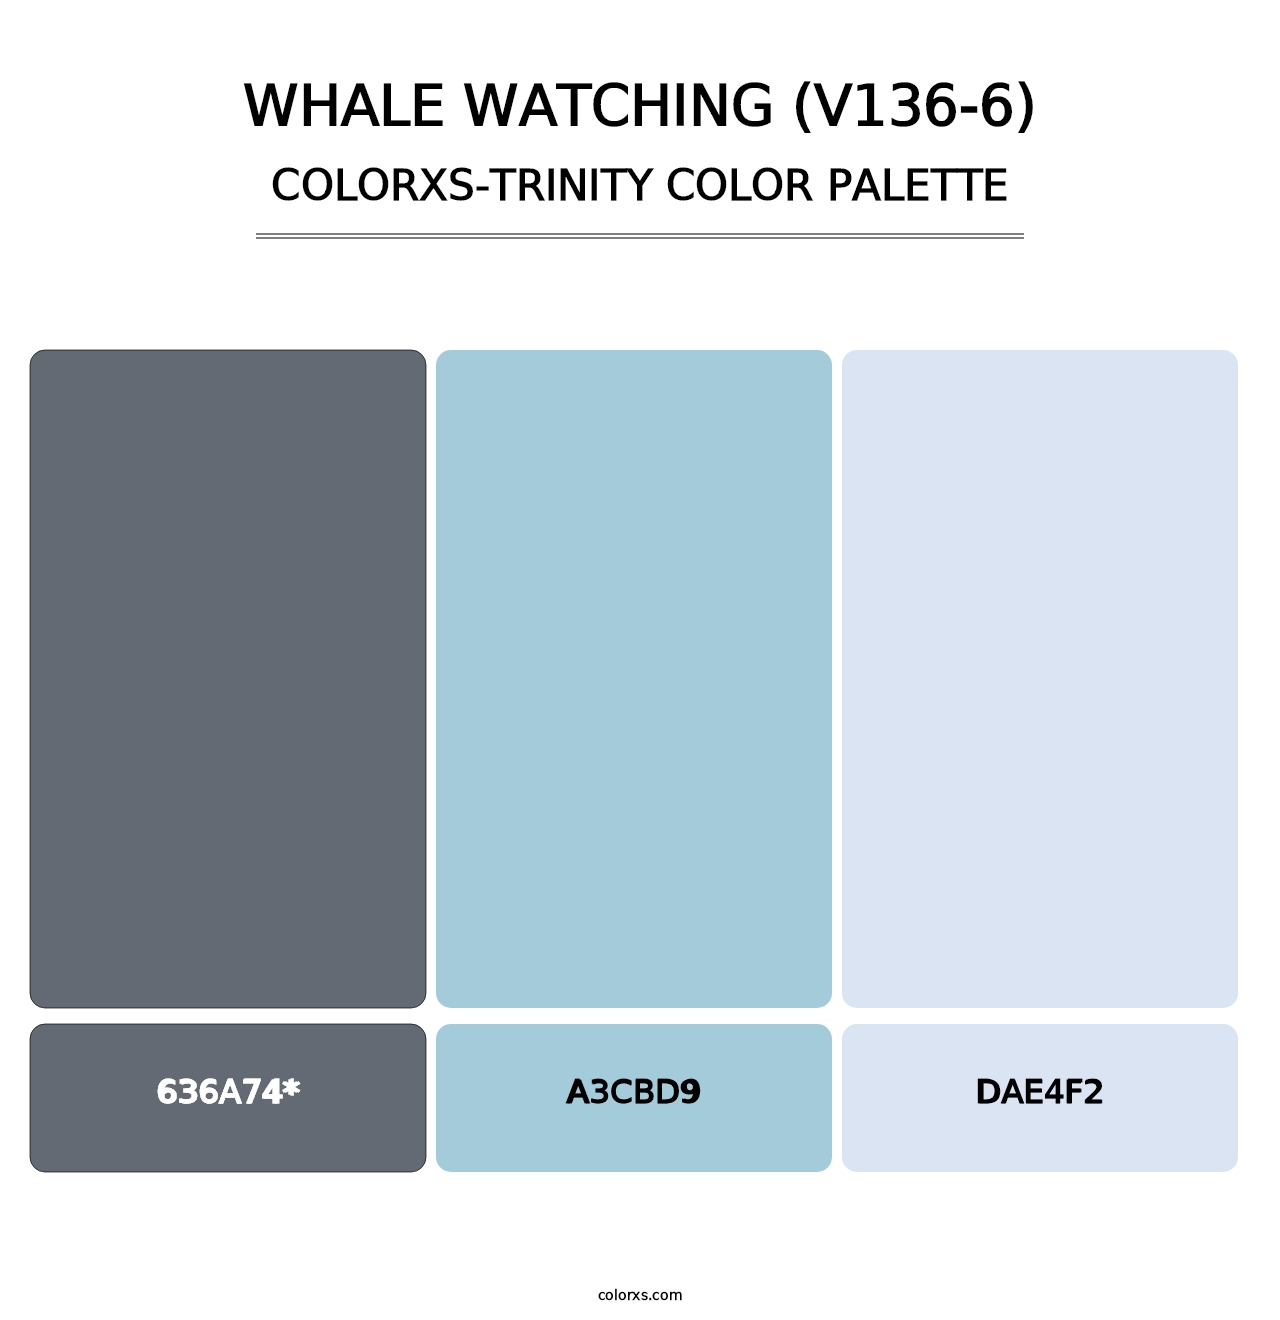 Whale Watching (V136-6) - Colorxs Trinity Palette